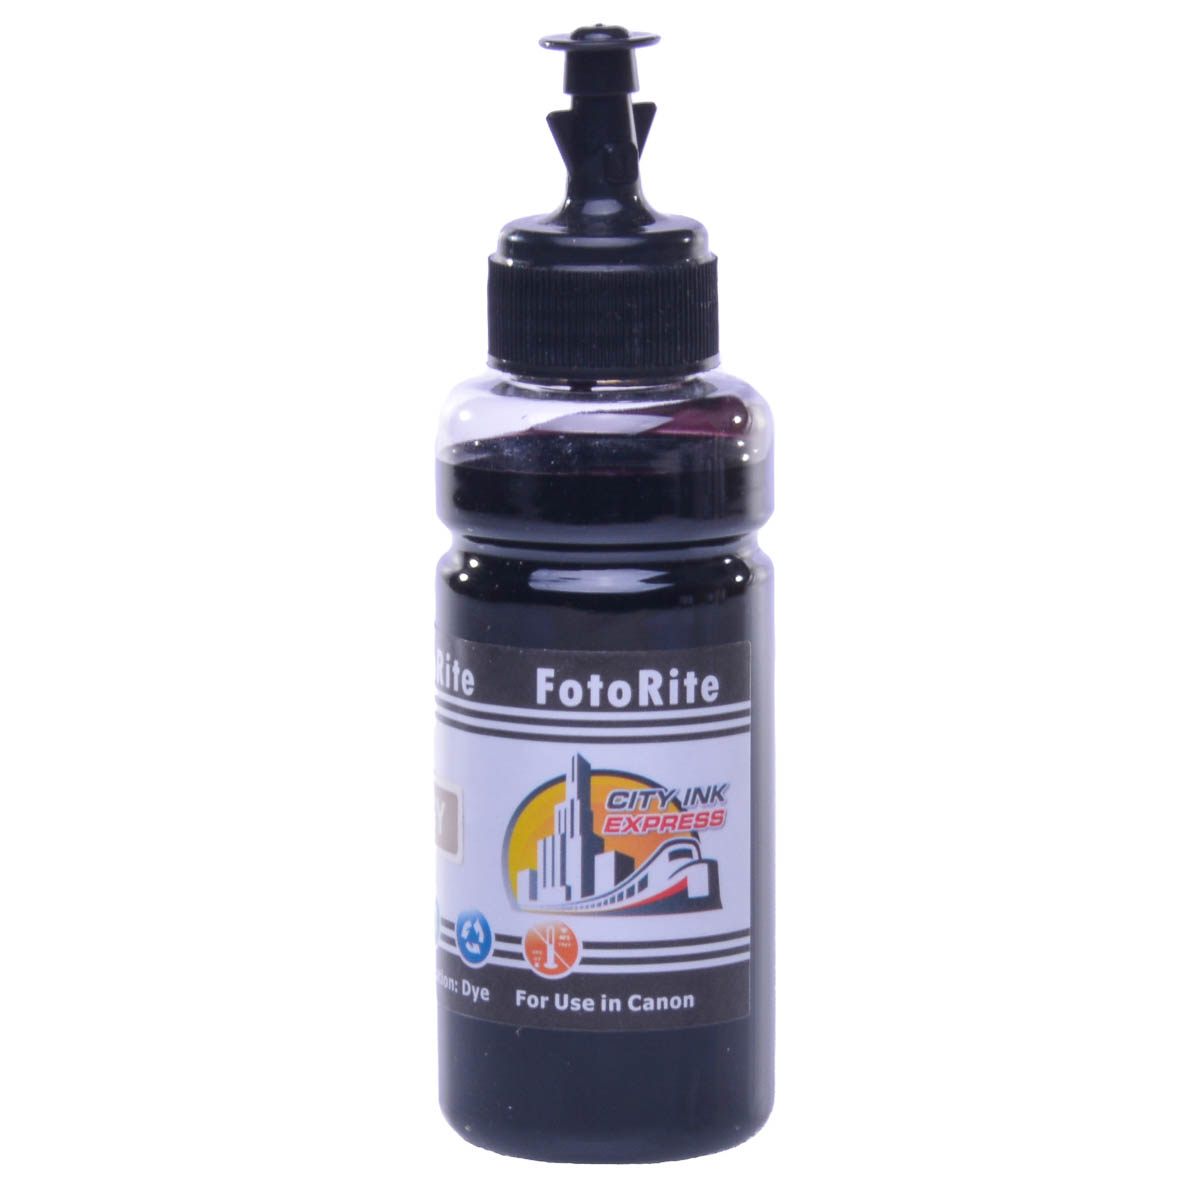 Cheap Grey dye ink replaces Canon Pixma MG7550 - CLI-551GY